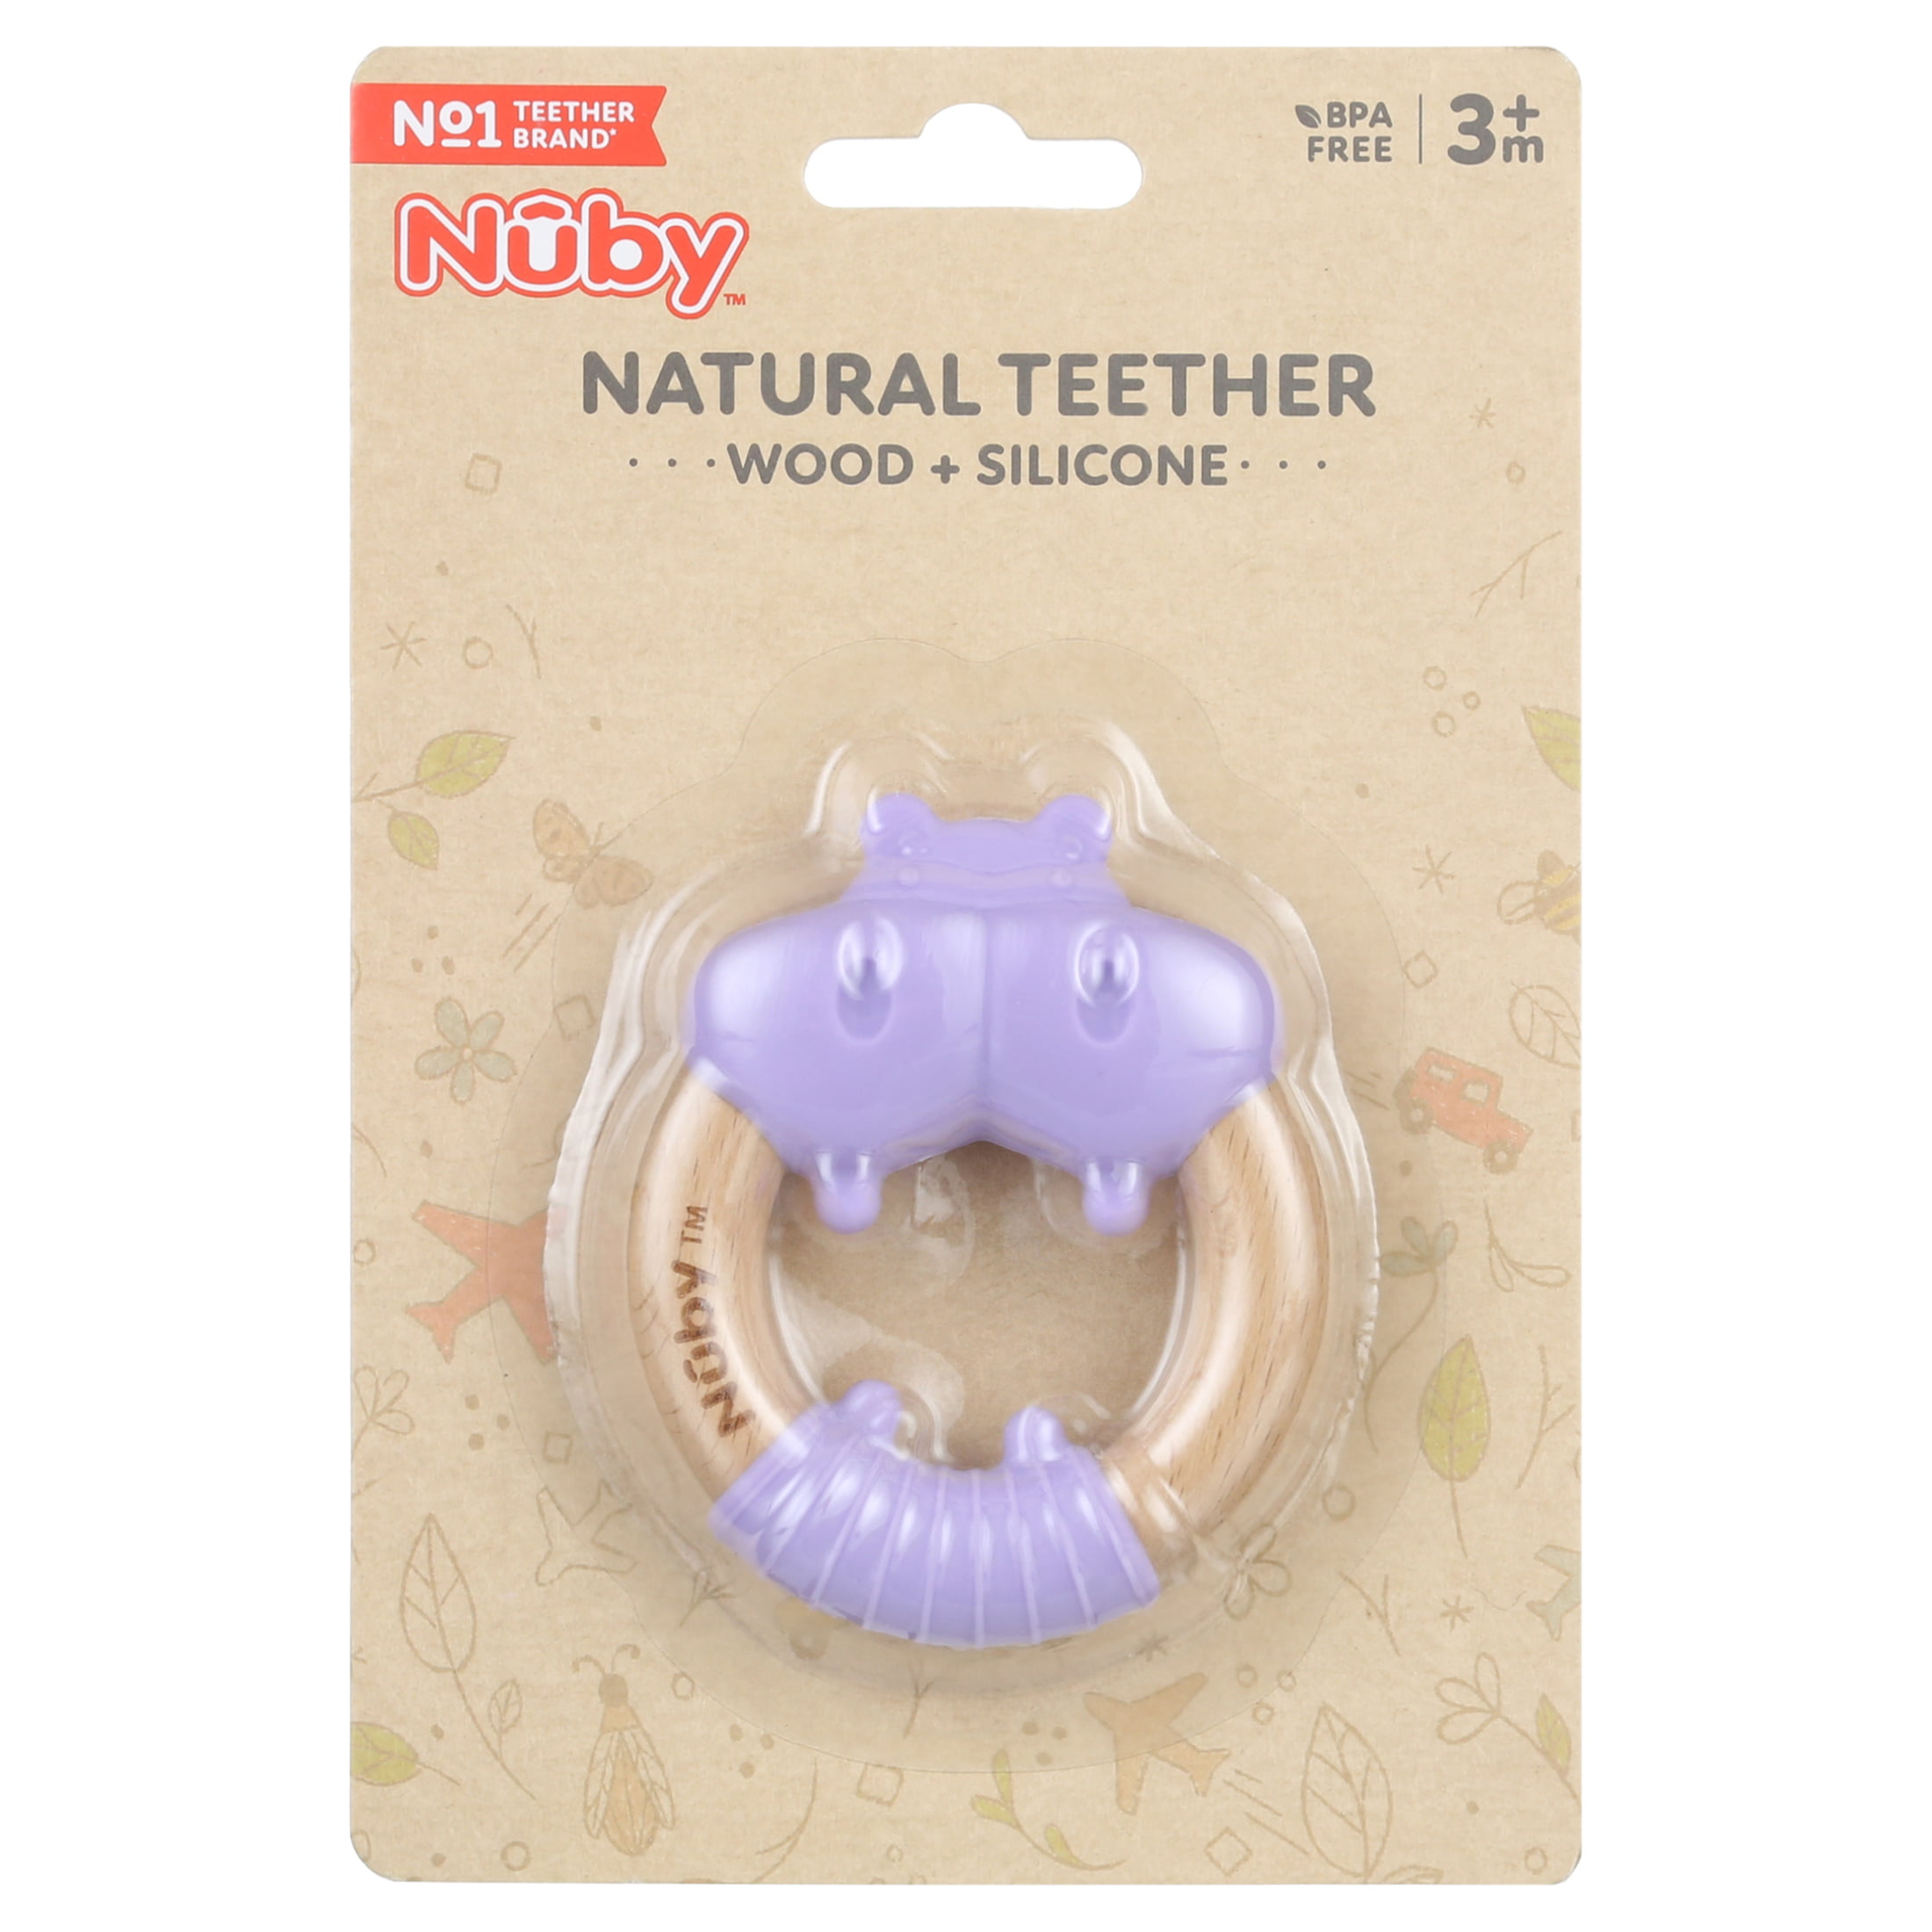 JER Wooden Teether Rings Natural Wood Teething Toys for Infant Soothing Pain Relief Toys for Baby 4Pack